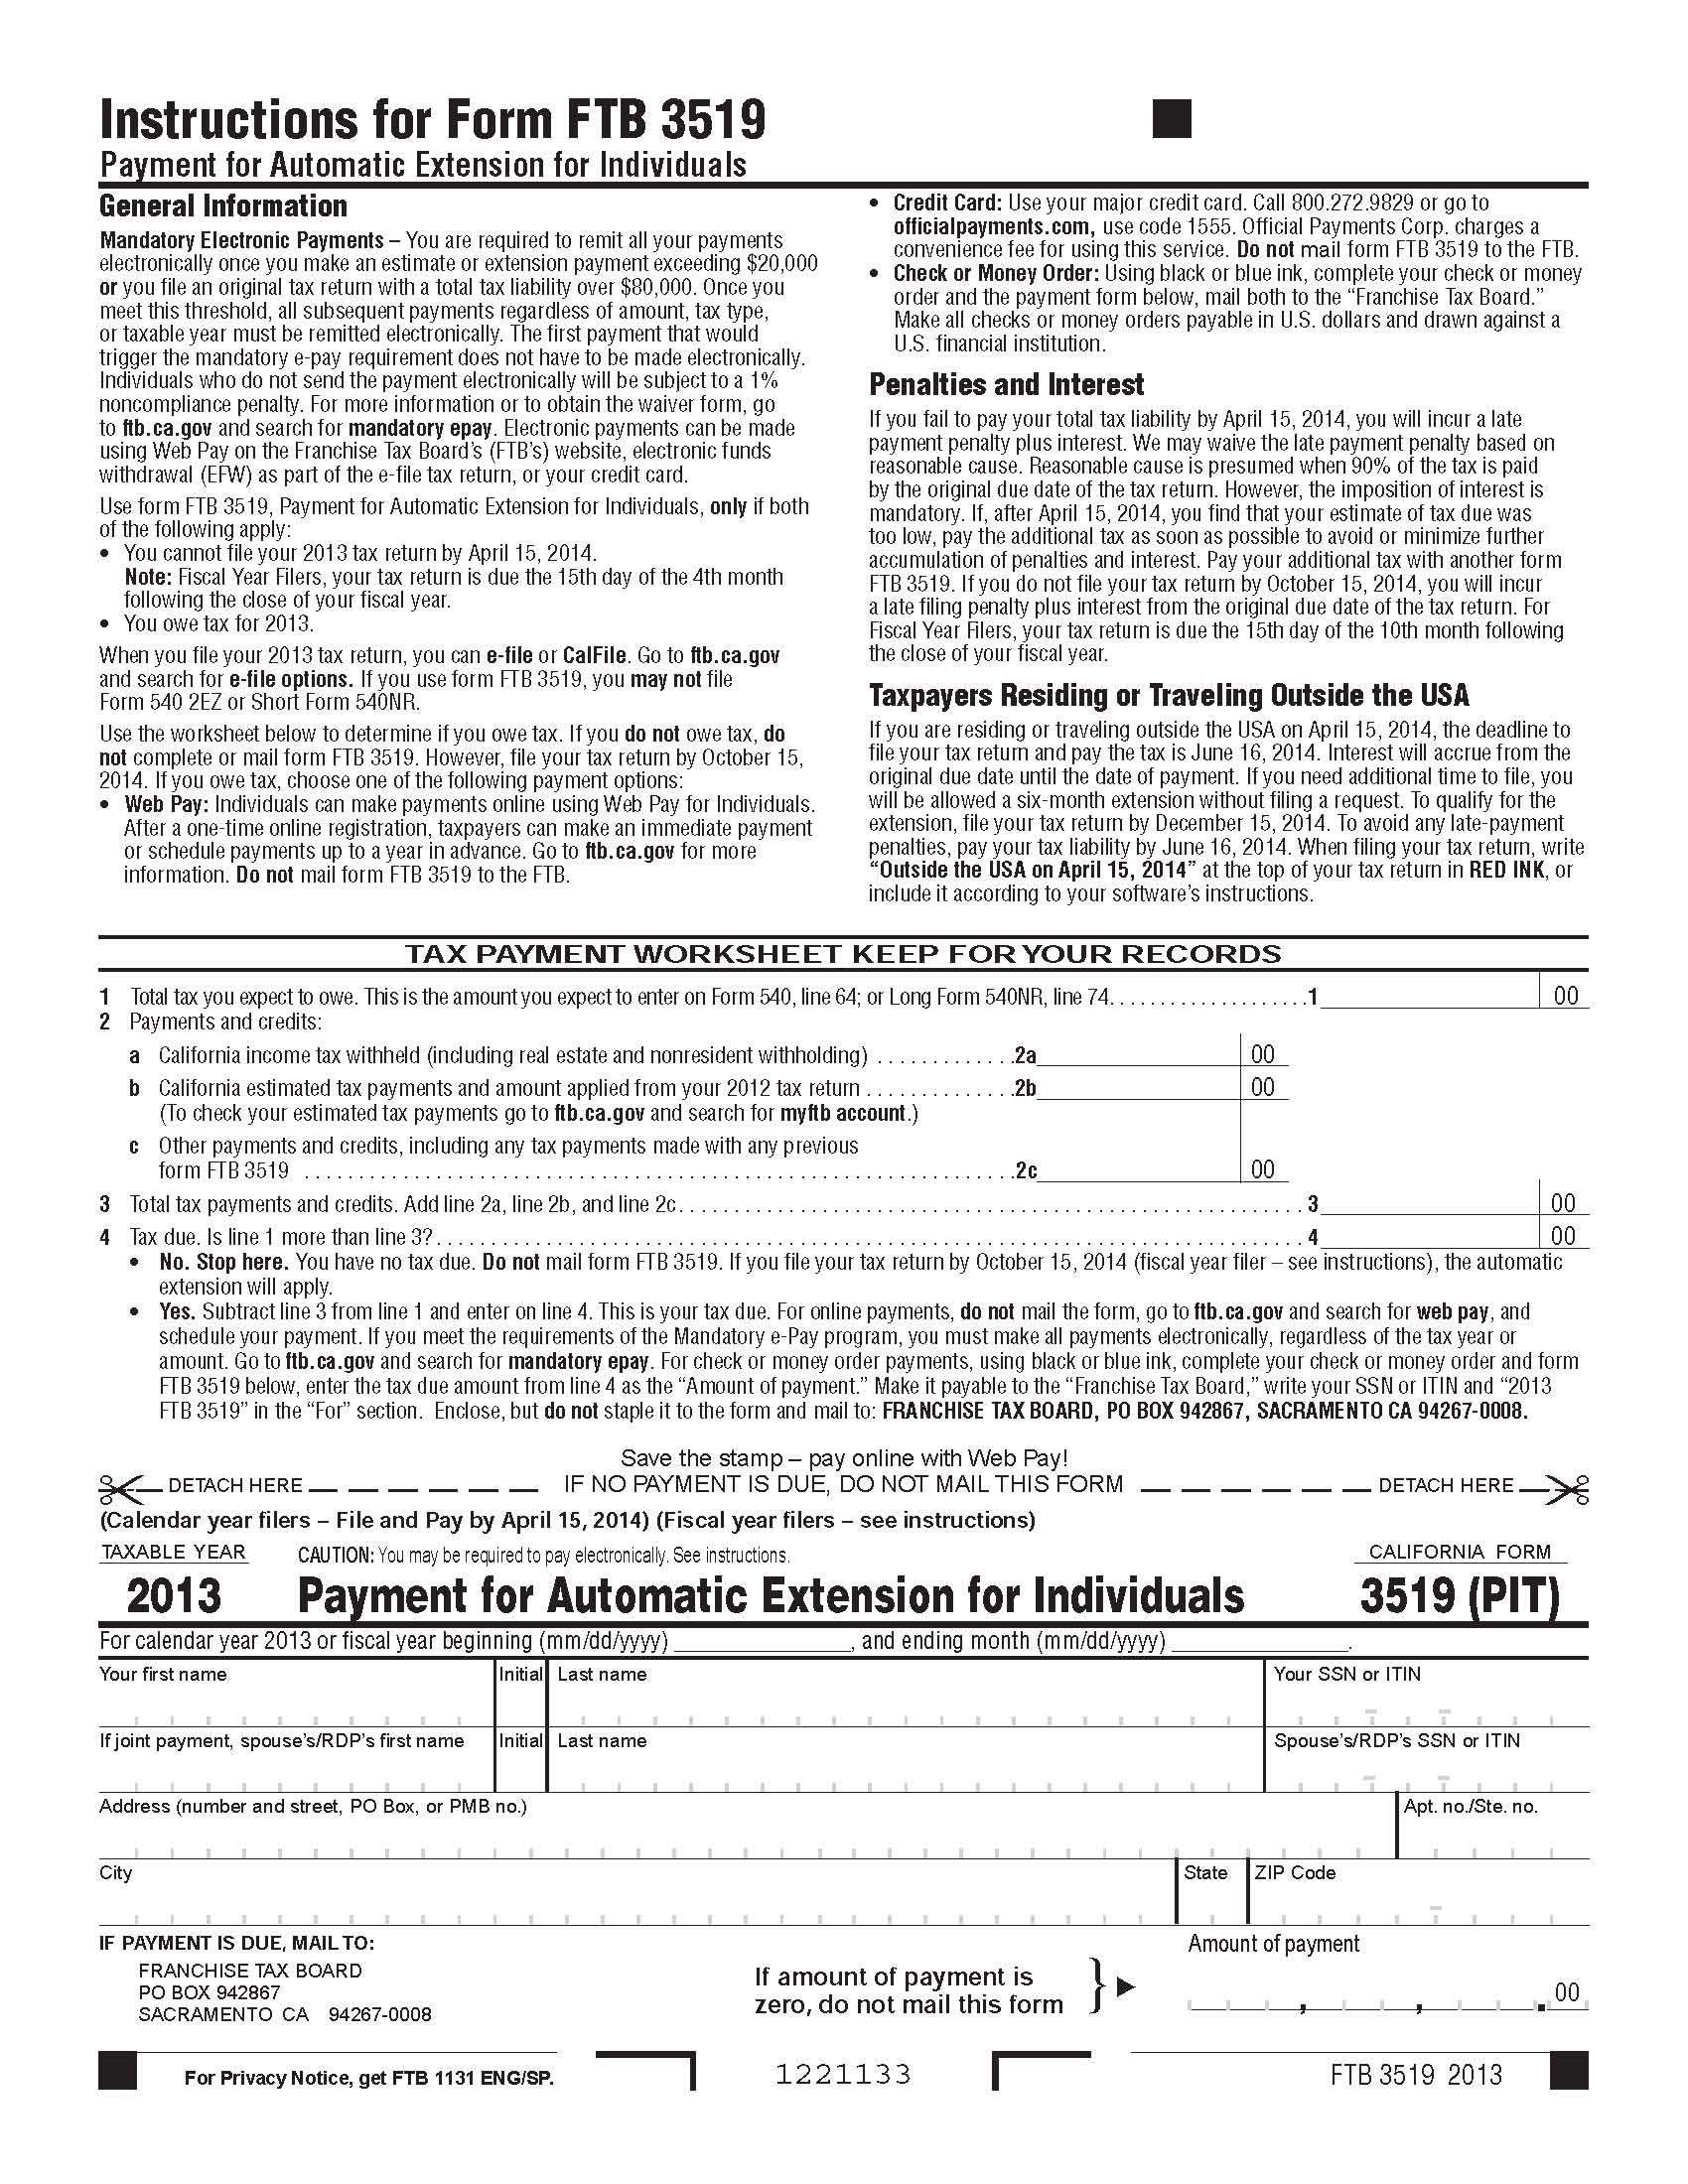 How do you download IRS form 4868 for a tax extension?